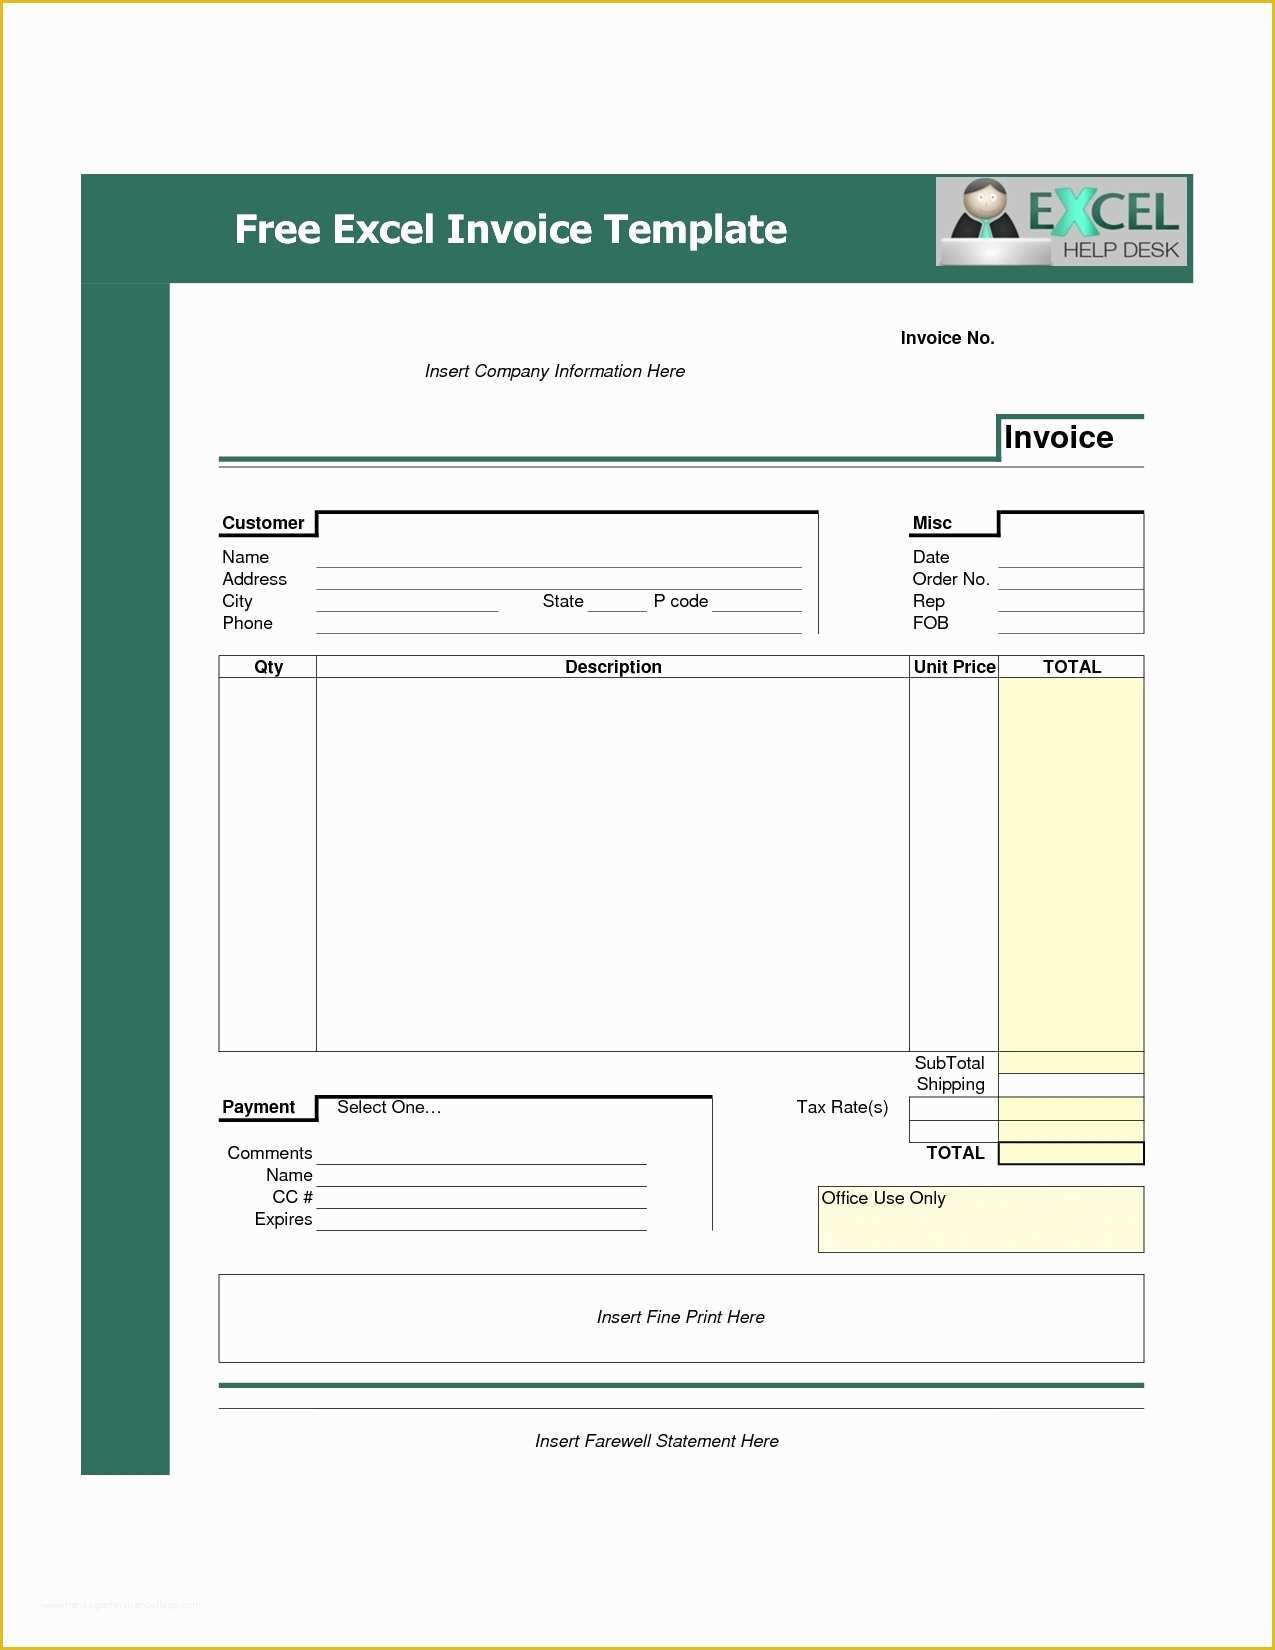 Excel Templates Free Download Of Invoice Template Free Download Excel Invoice Template Ideas